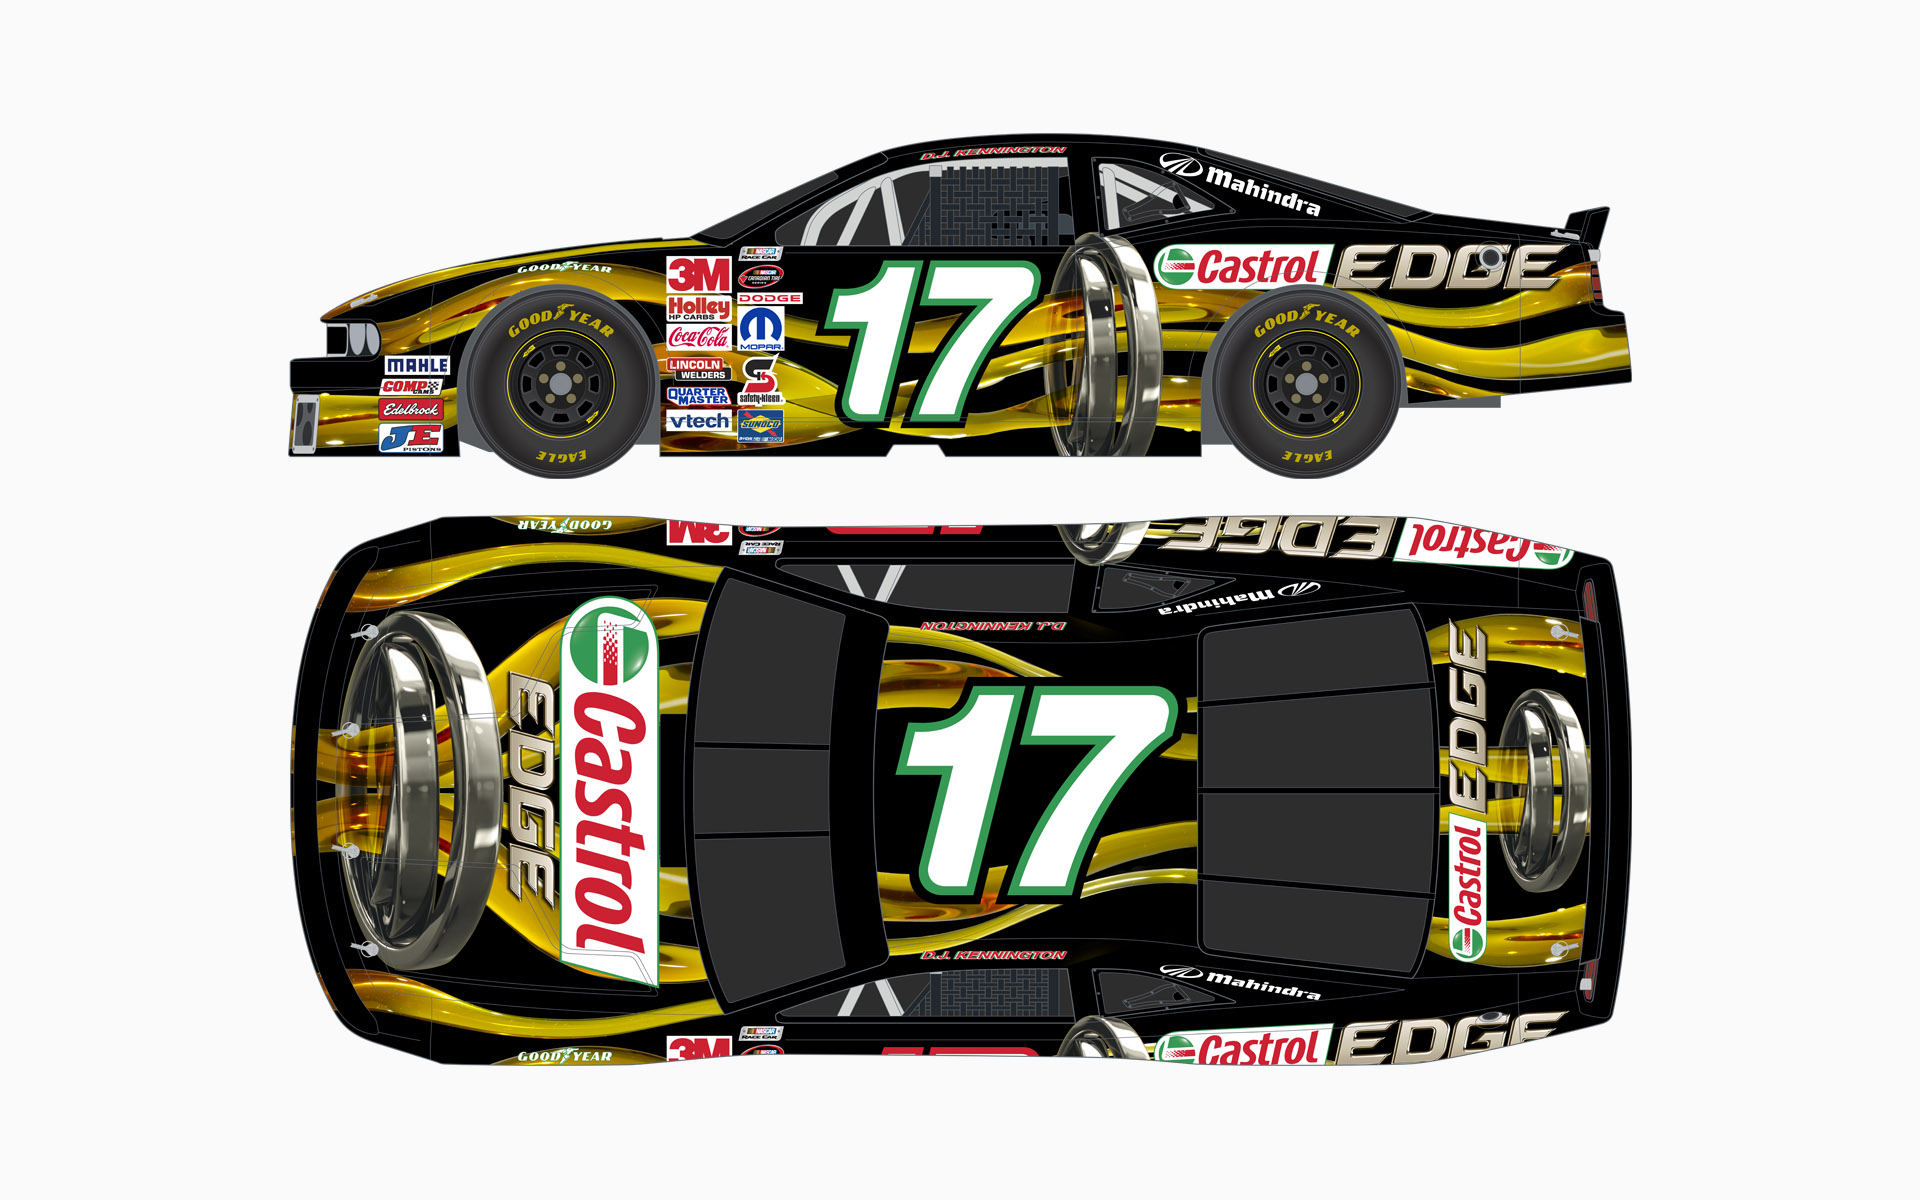 Wakefield Canada Castrol Edge Dodge Challenger NASCAR Canadian Tire Series Livery Elevations